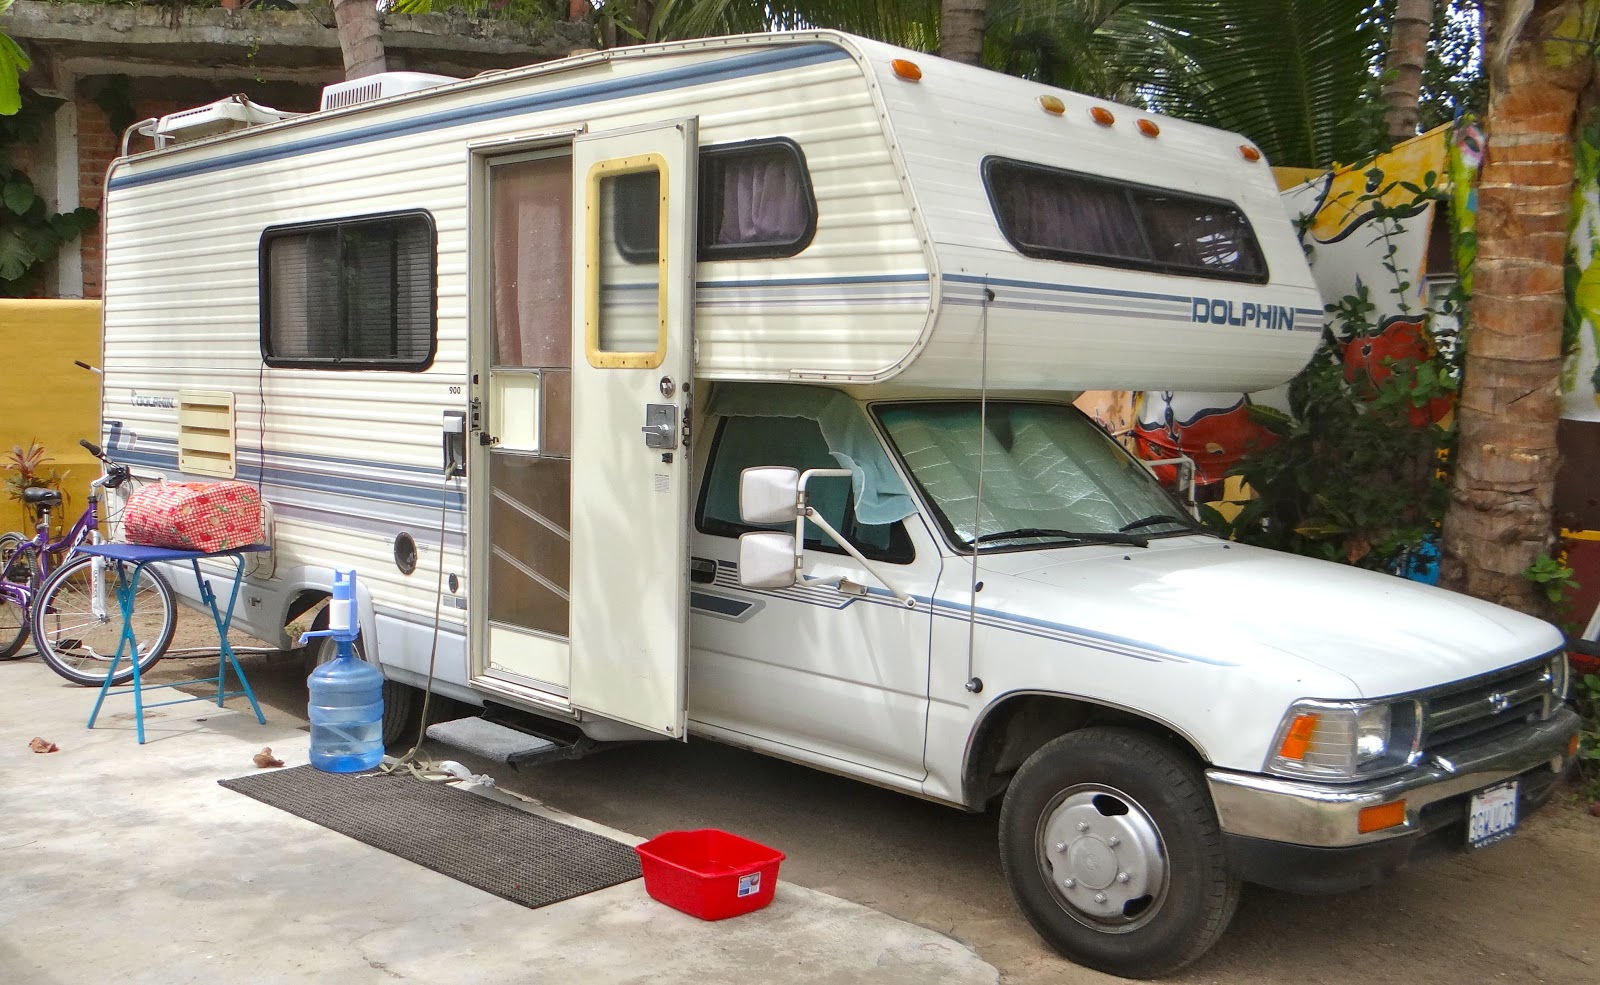 Things You Need To Stock Up On For RV Trips